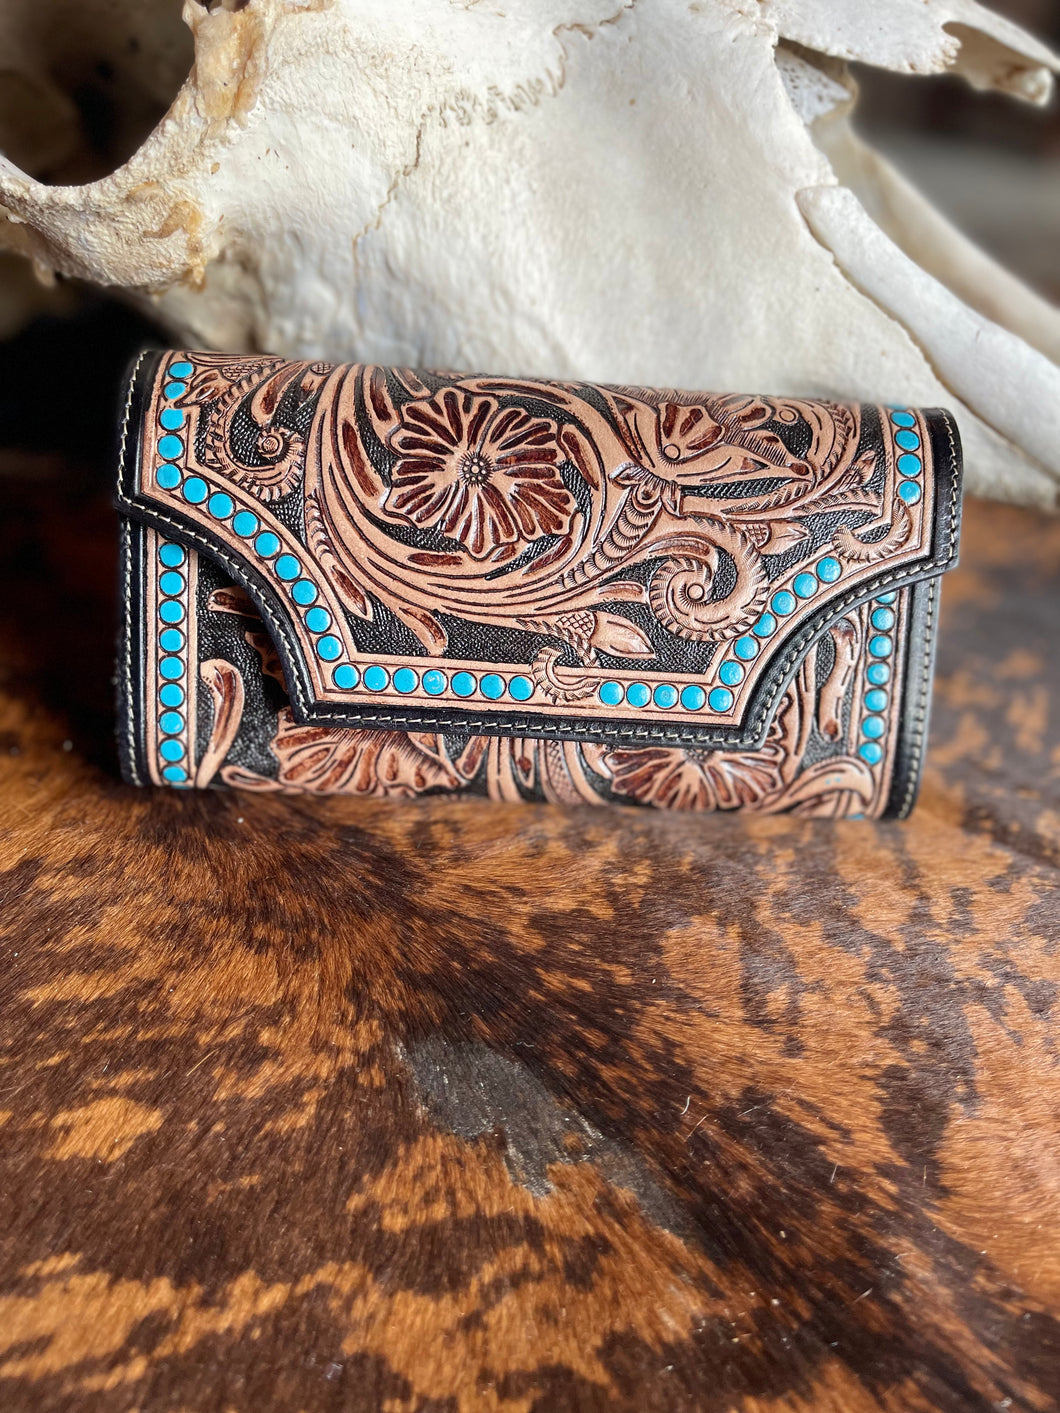 The Turquoise Tooled Wallet